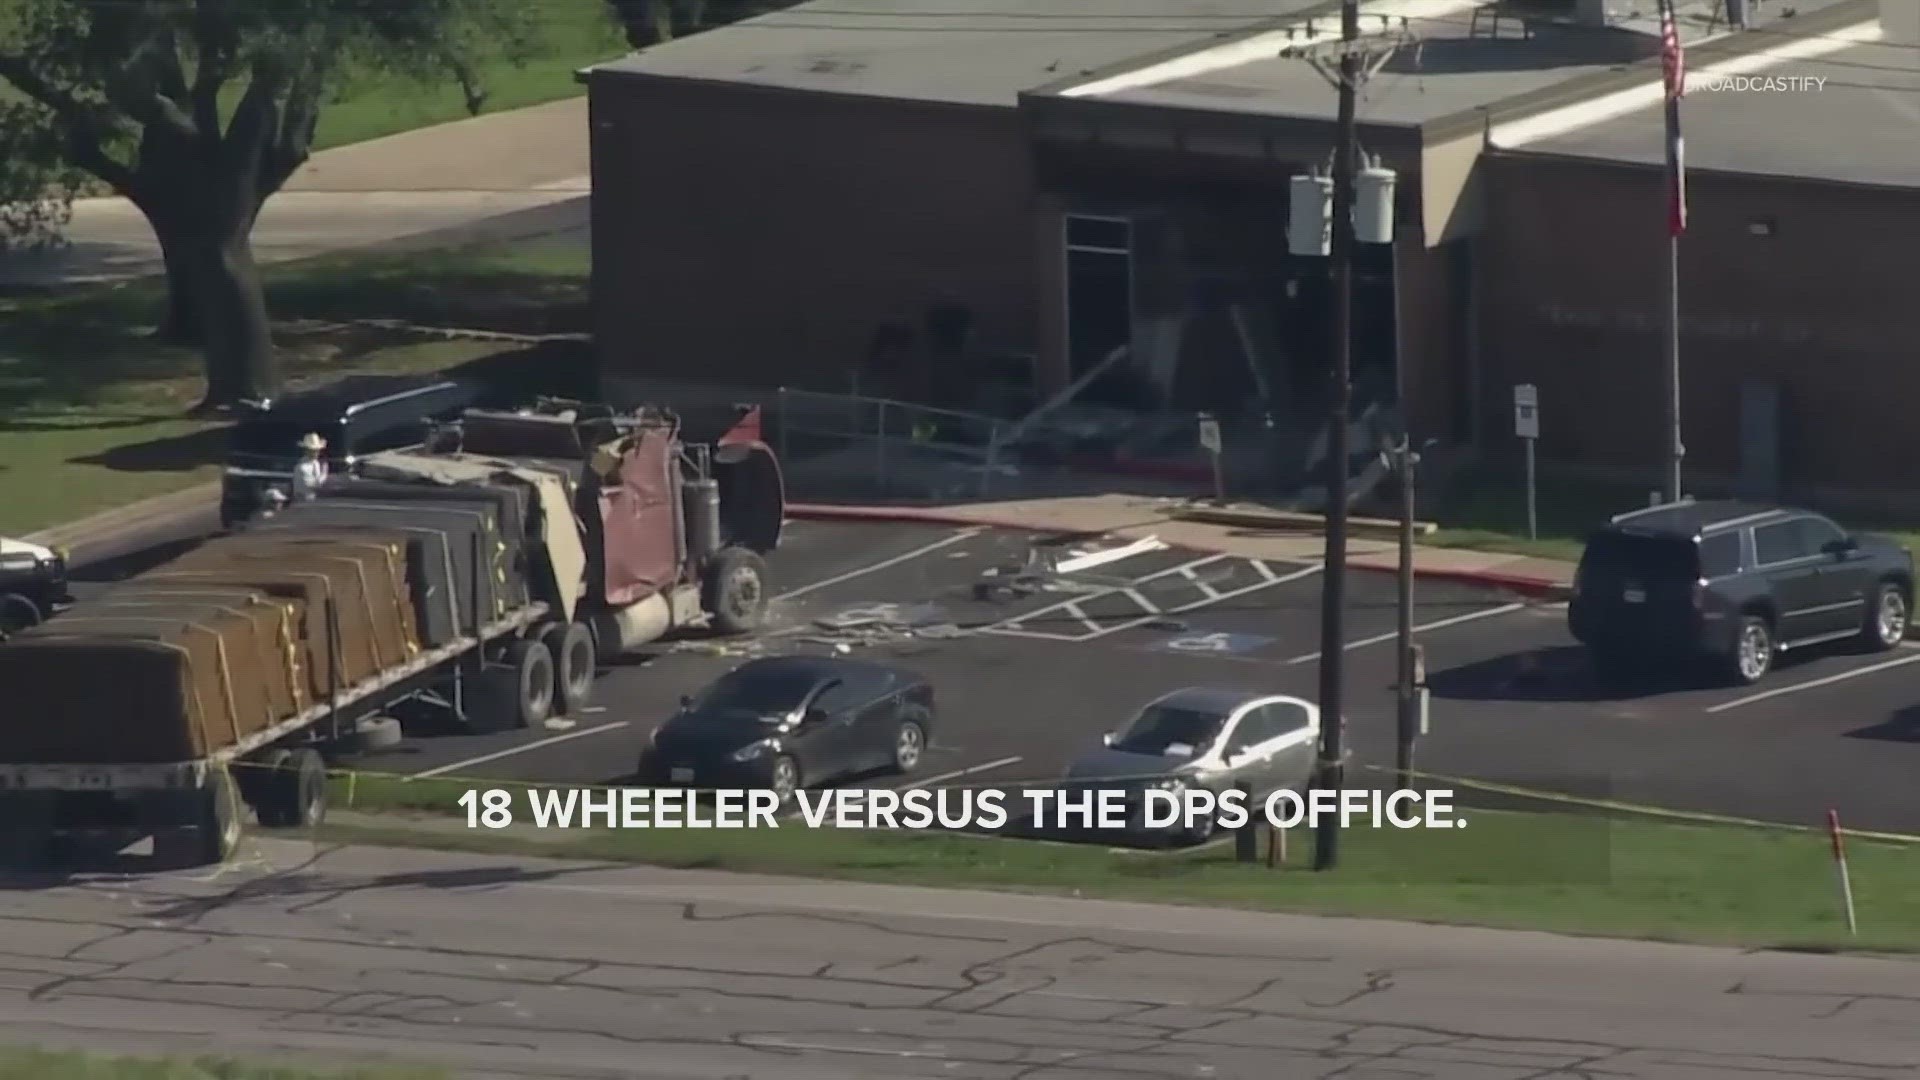 DPS said the man behind the wheel drove the 18-wheeler into the Brenham office after he was denied a CDL renewal the day before.